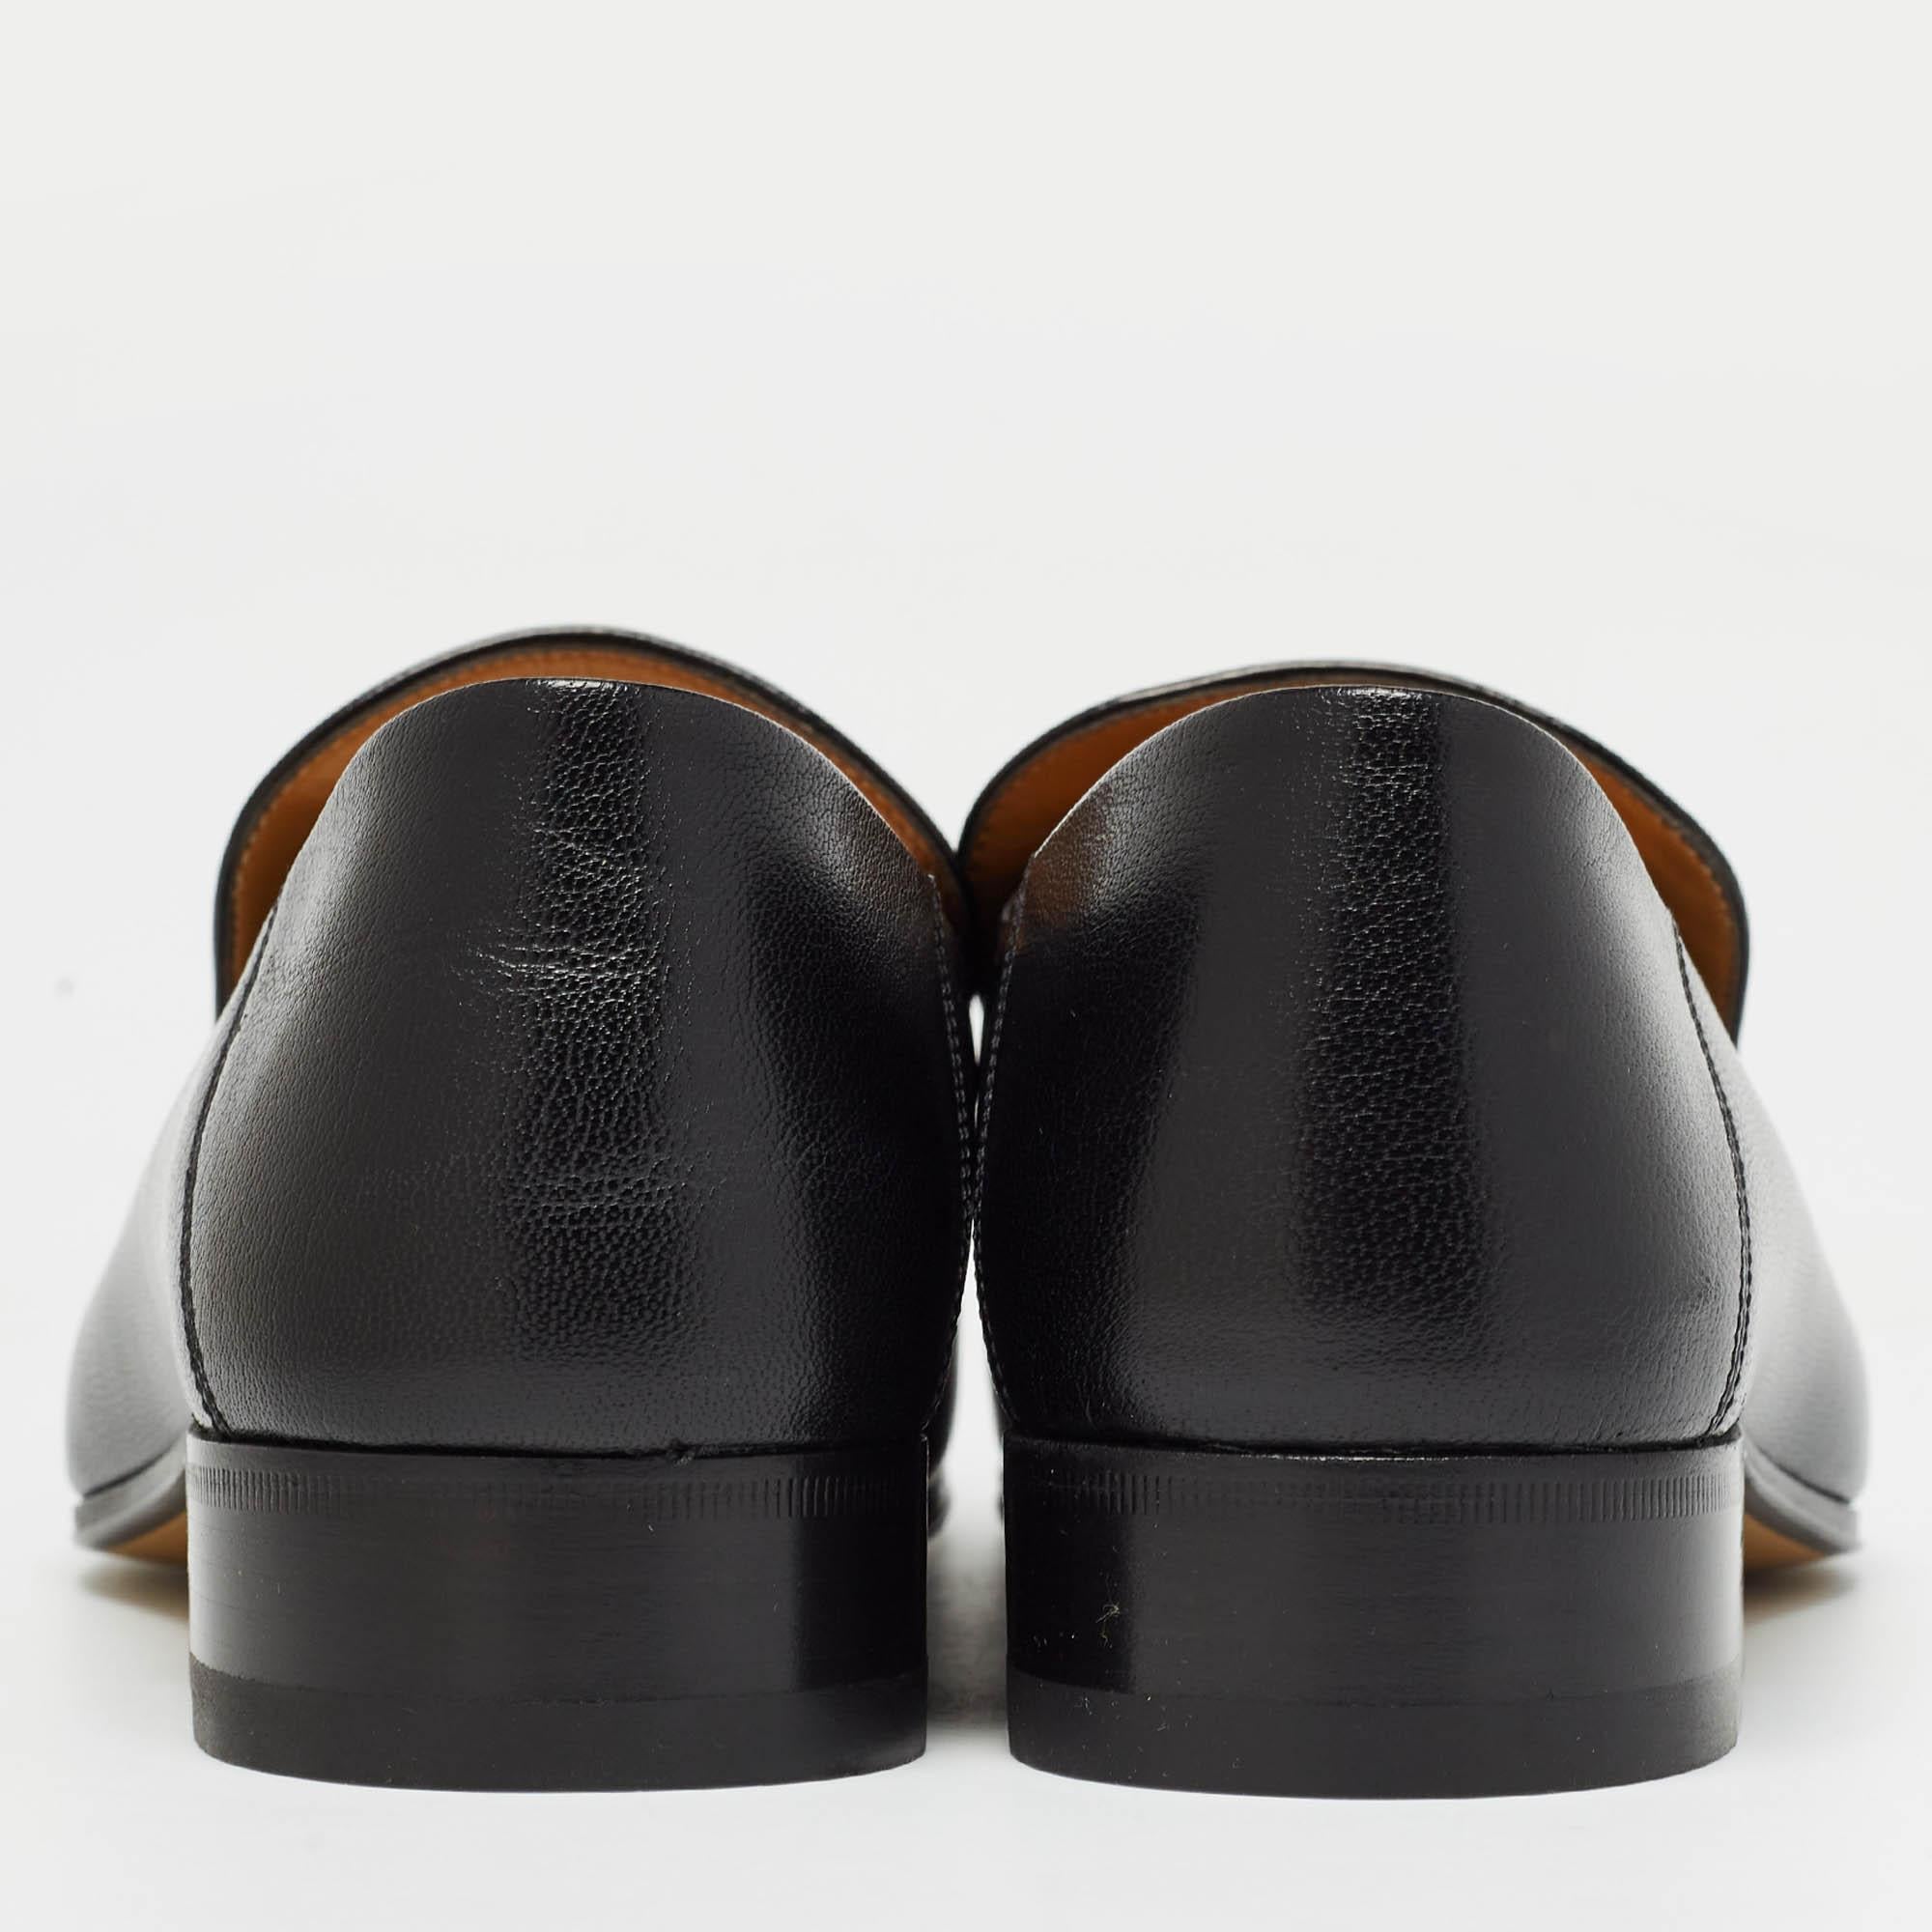 Crafted from classic black-hued leather, these loafers from Gucci simply stand out! They feature a round-toe silhouette with the iconic Horsebit accents in gold-tone detailed on the vamps. These foldable loafers are complete with comfortable